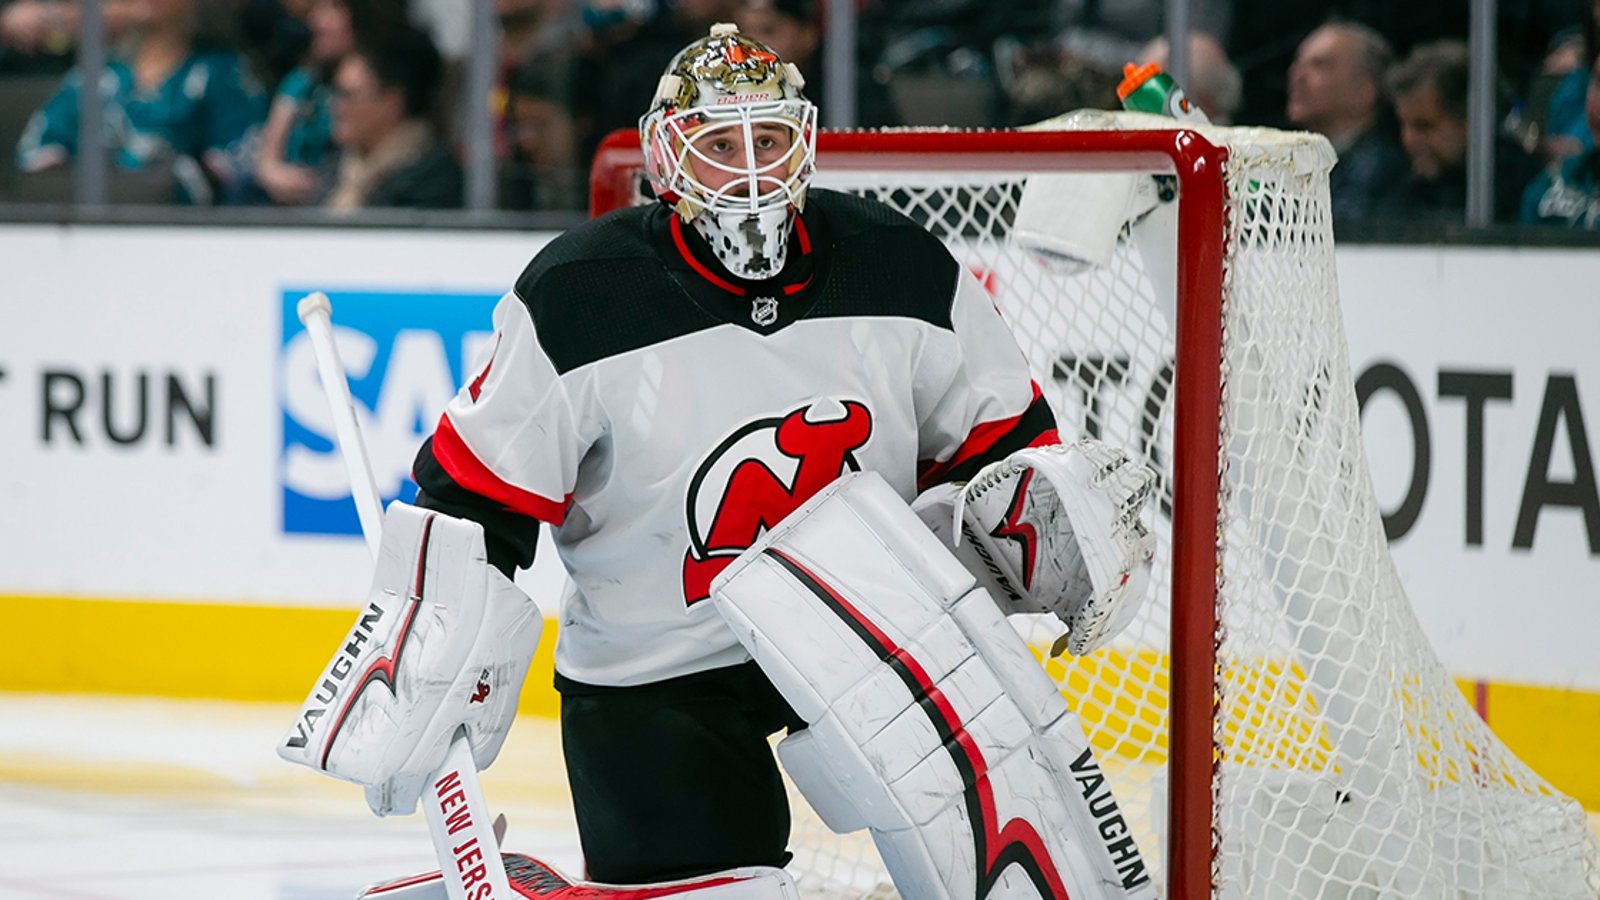 Uncle of former Devils goalie Kinkaid goes on epic Facebook rant after trade to Blue Jackets